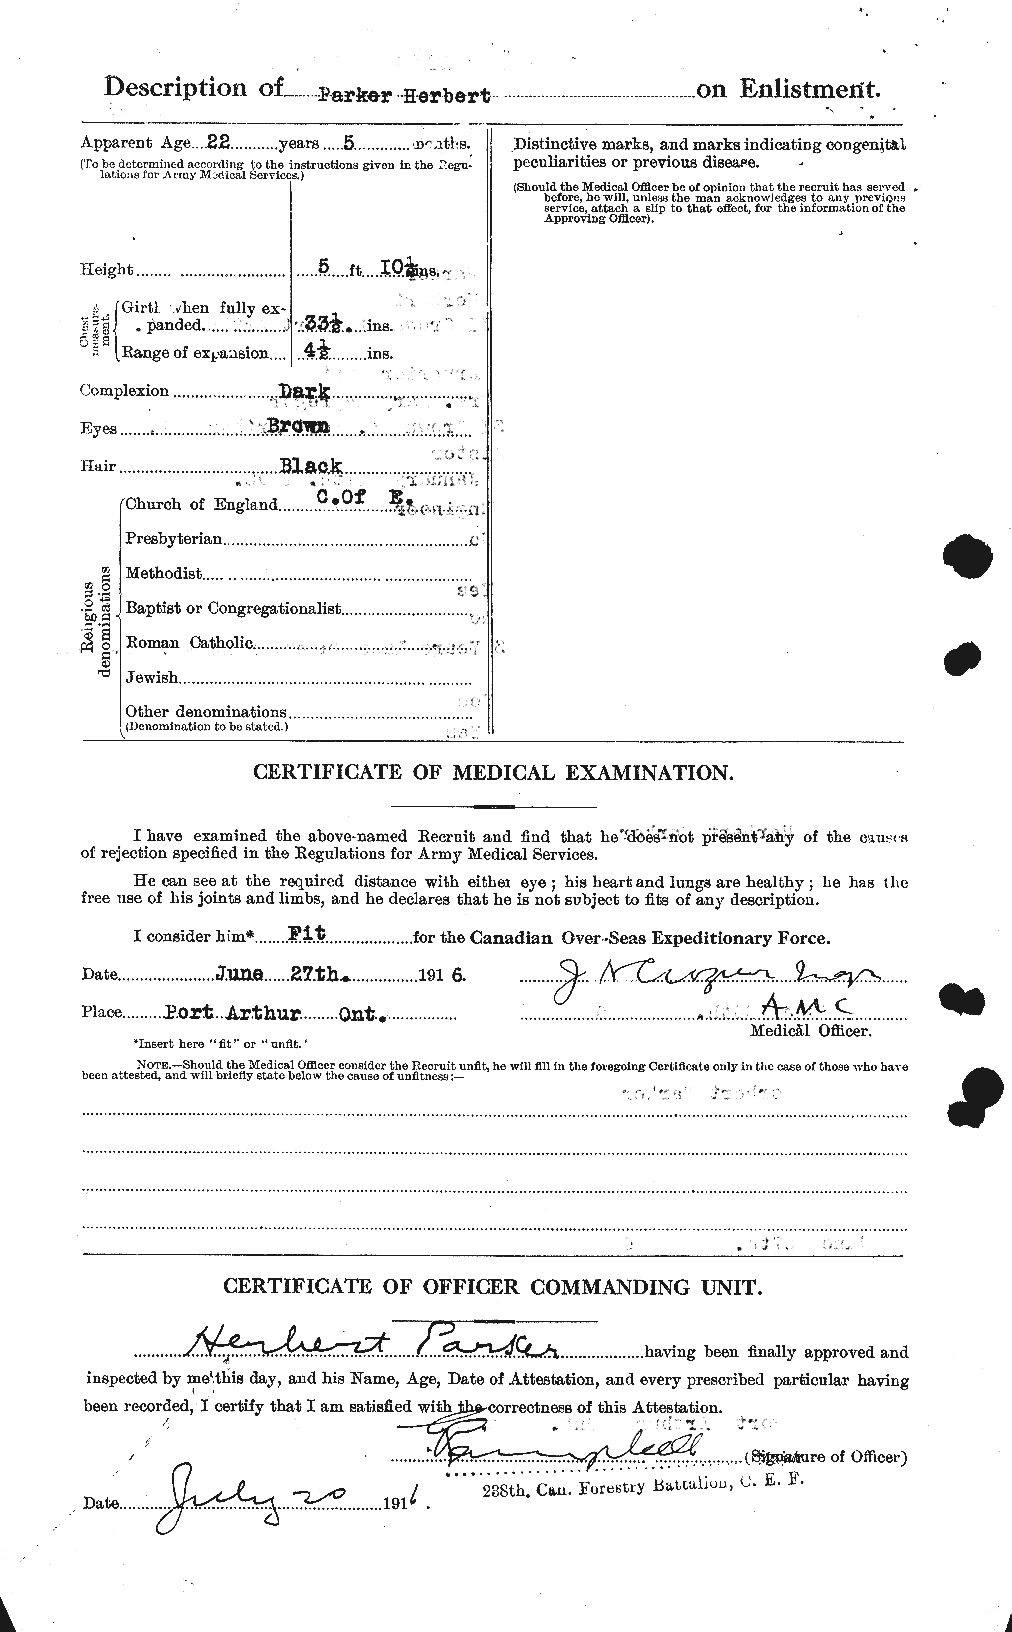 Personnel Records of the First World War - CEF 565367b